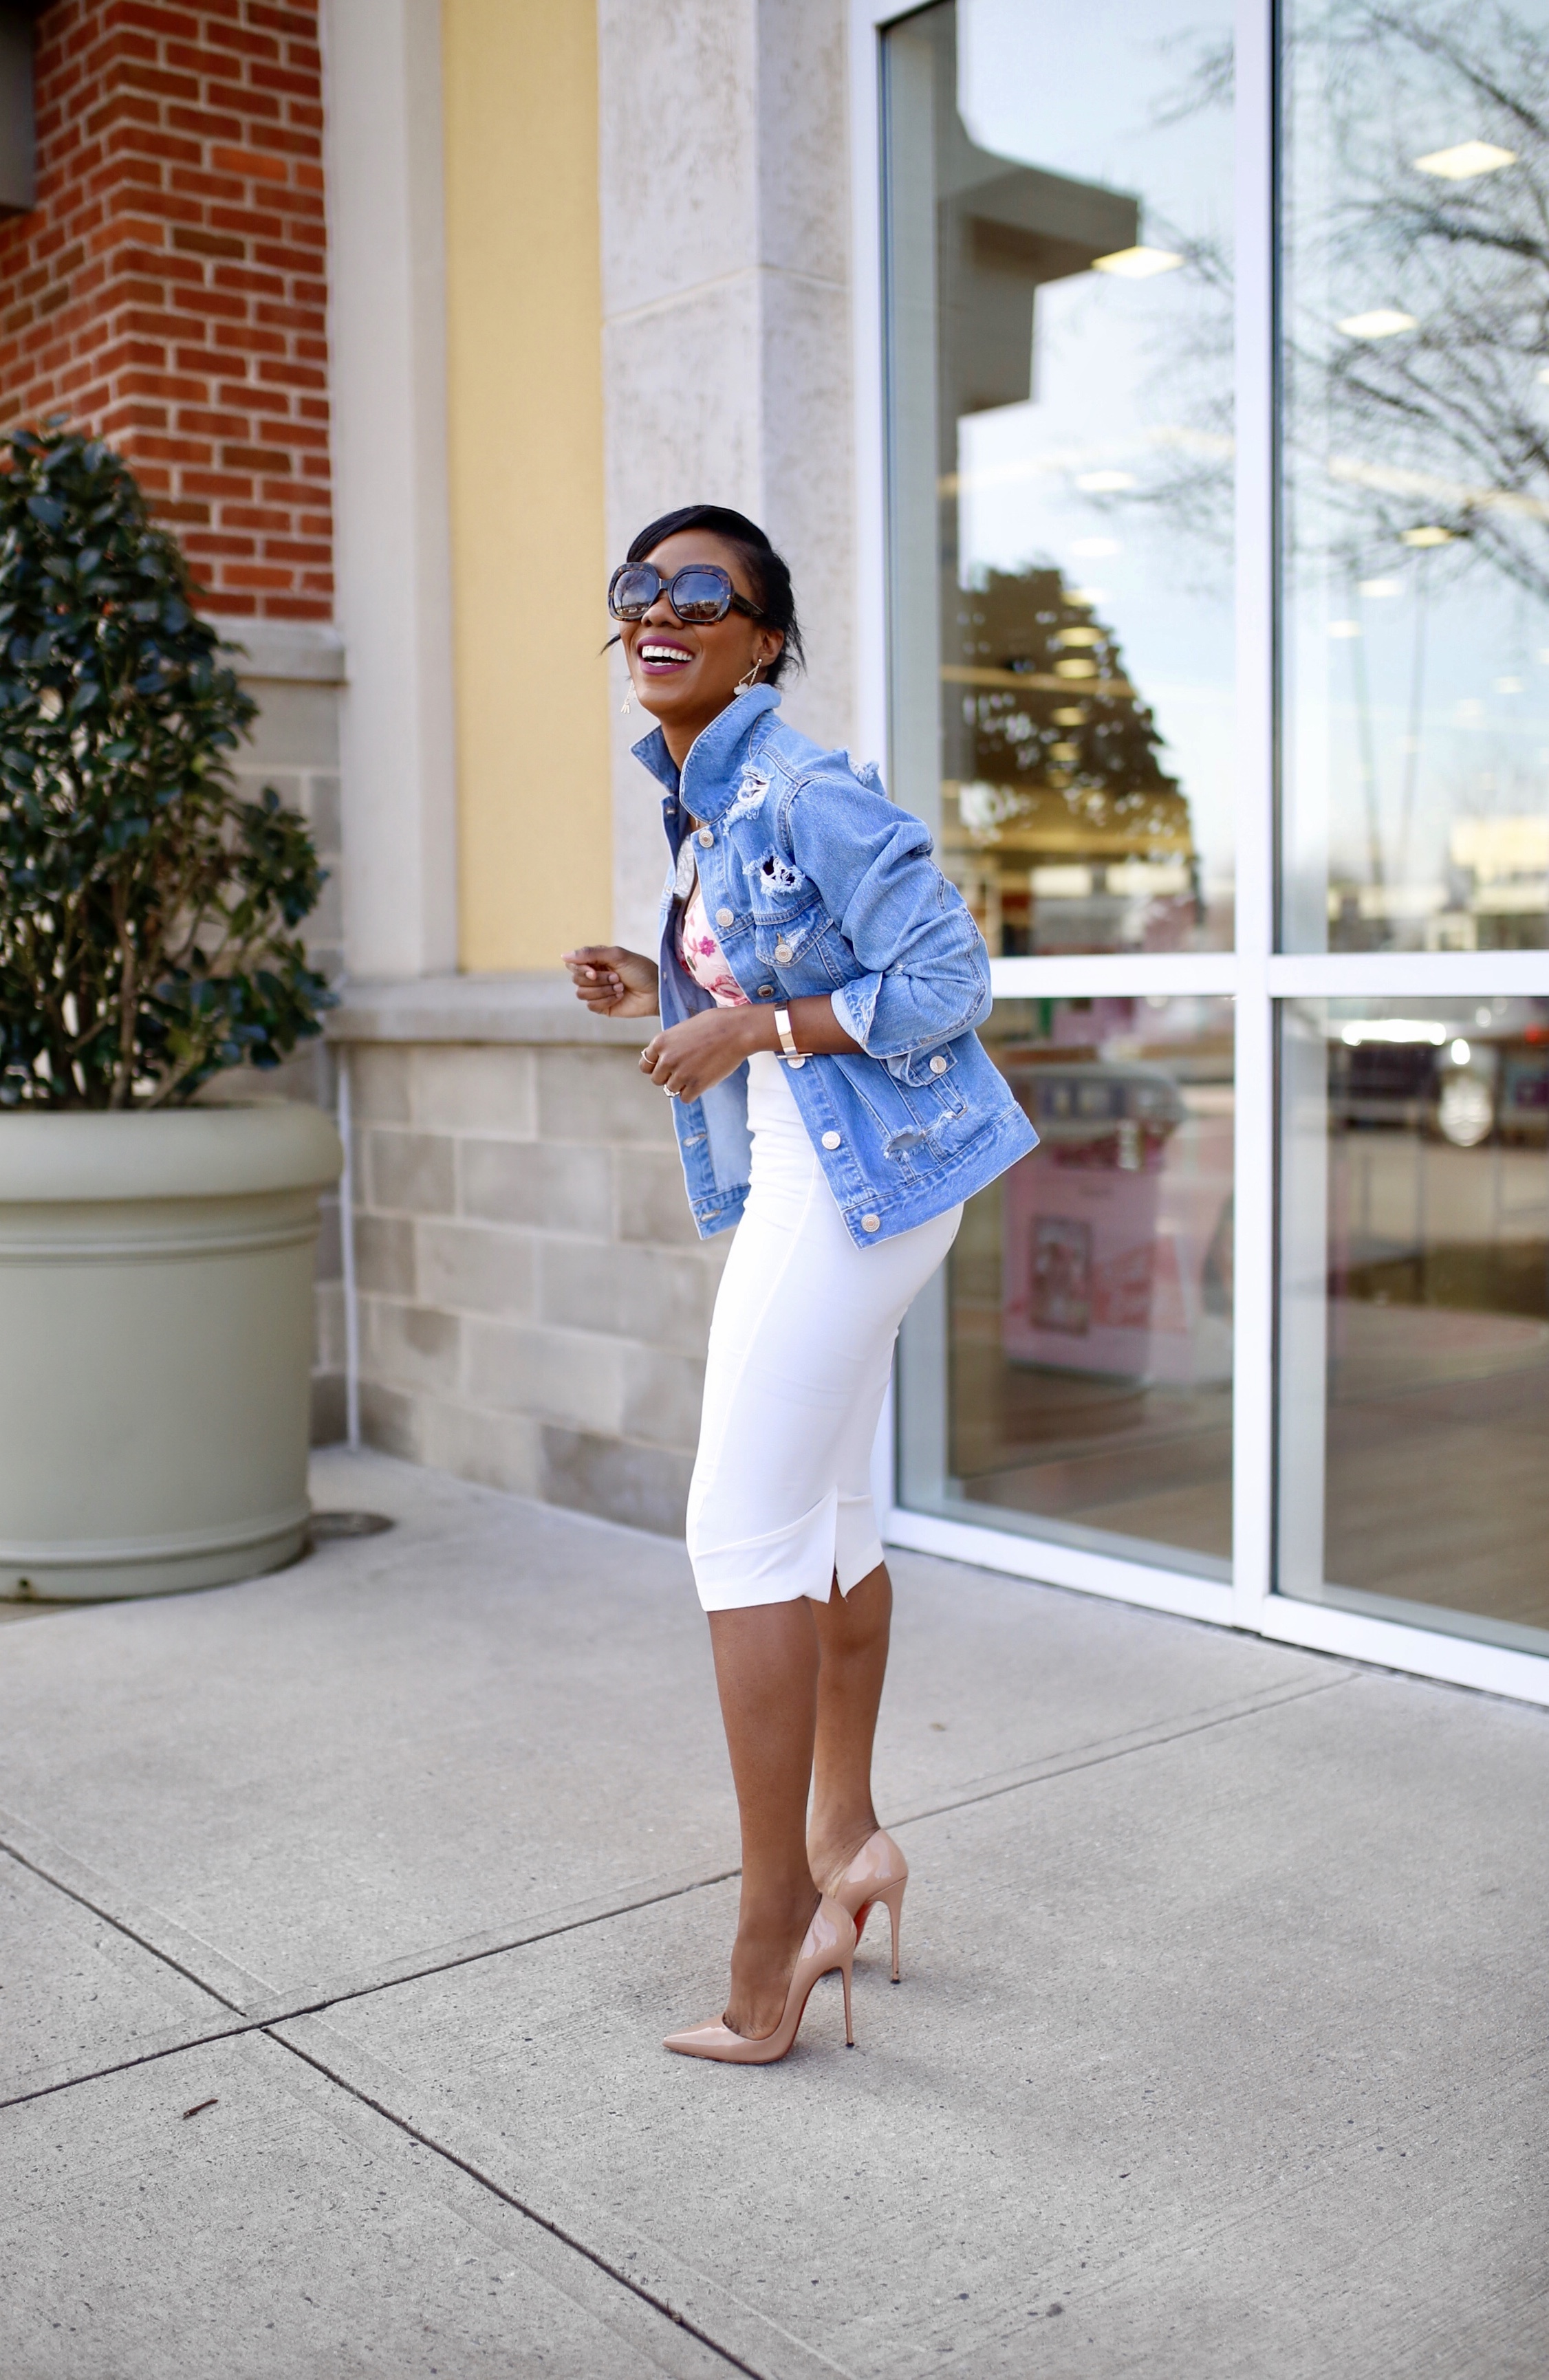 How to wear a denim jacket without looking frumpy! You'd love these three stylish ways. And guess what? You can recreate this style with pieces from your closet.